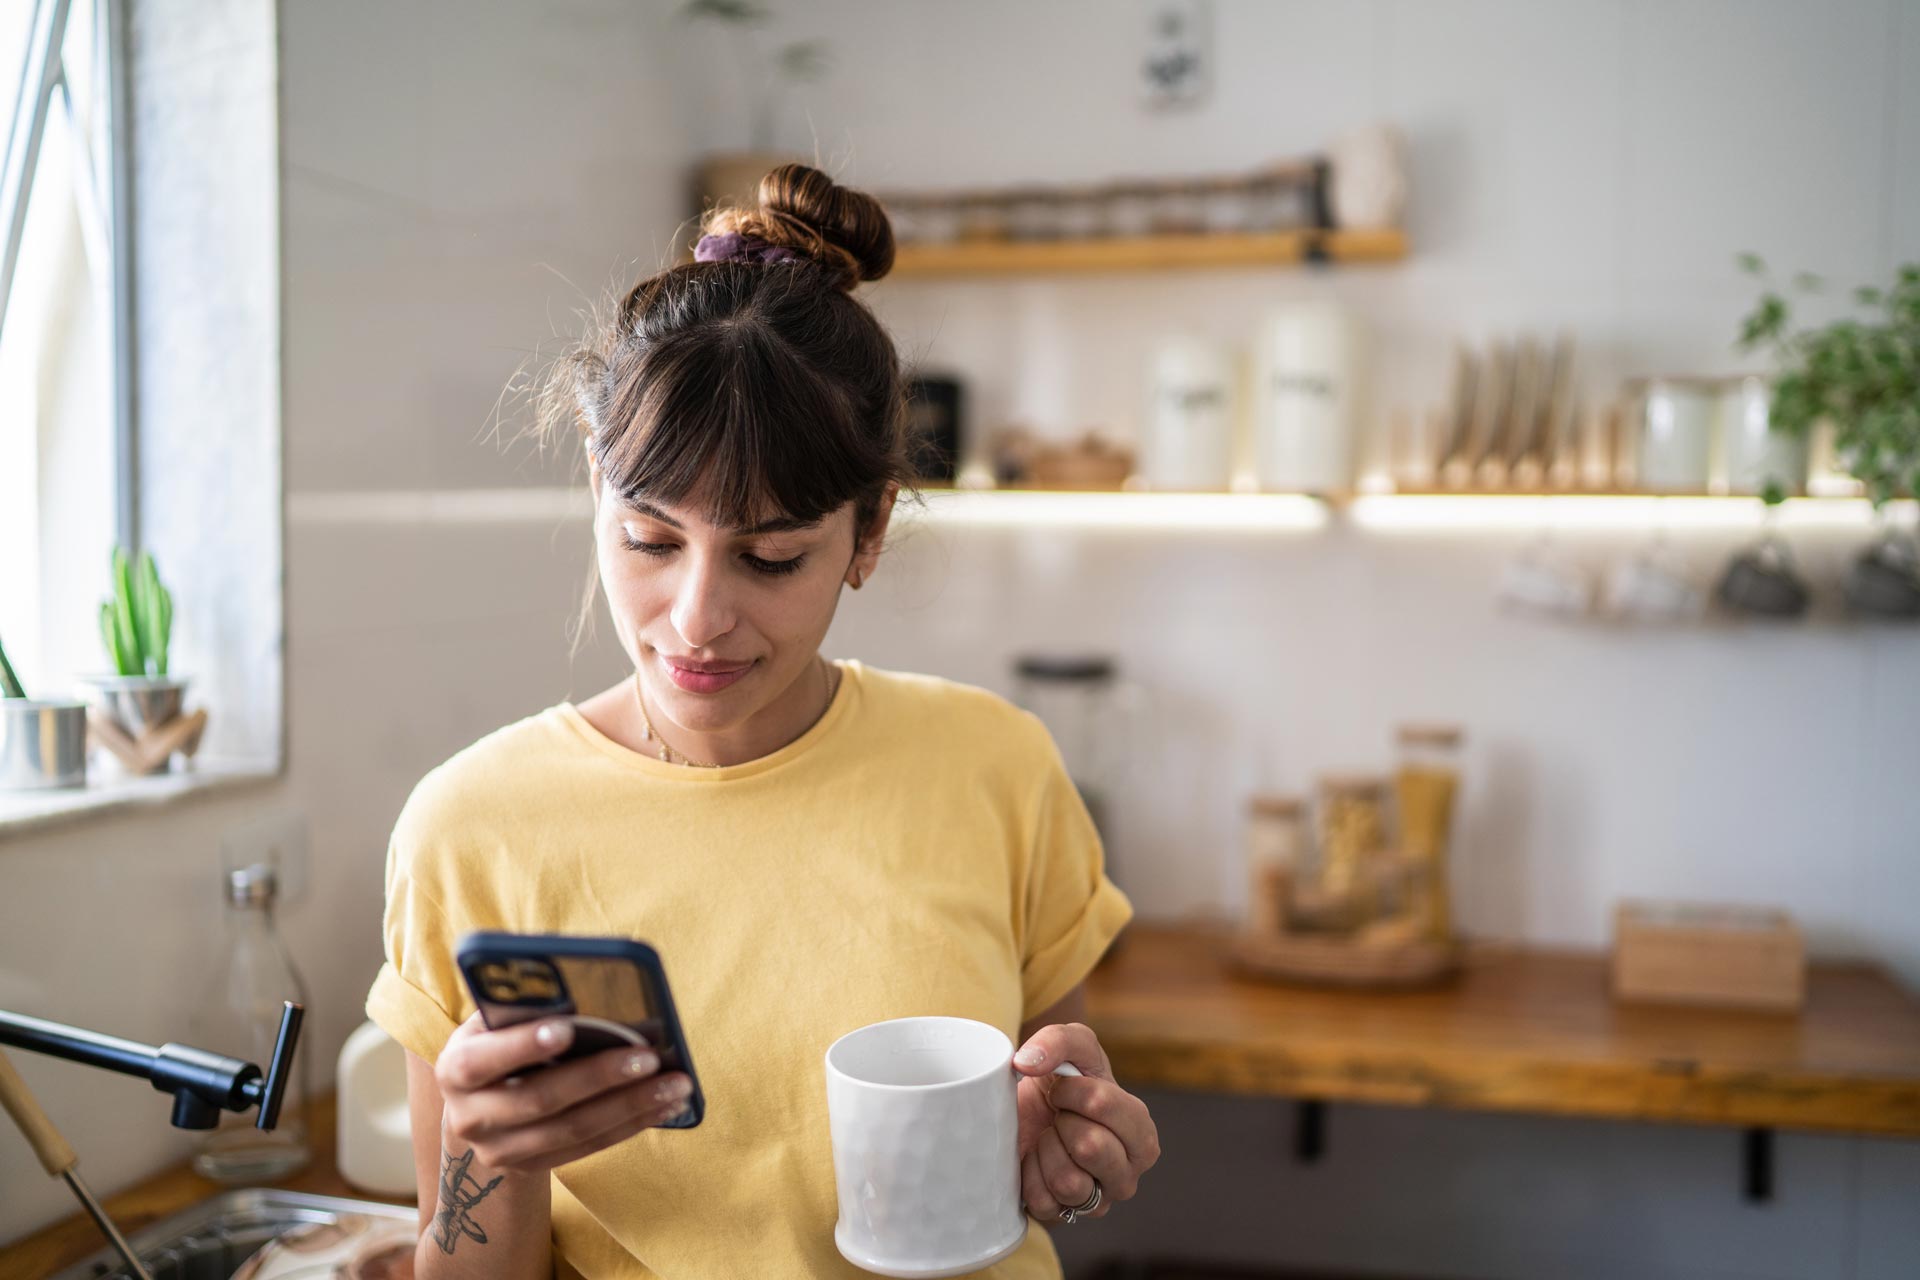 Young woman in yellow enjoying a hot drink and looking at her phone.